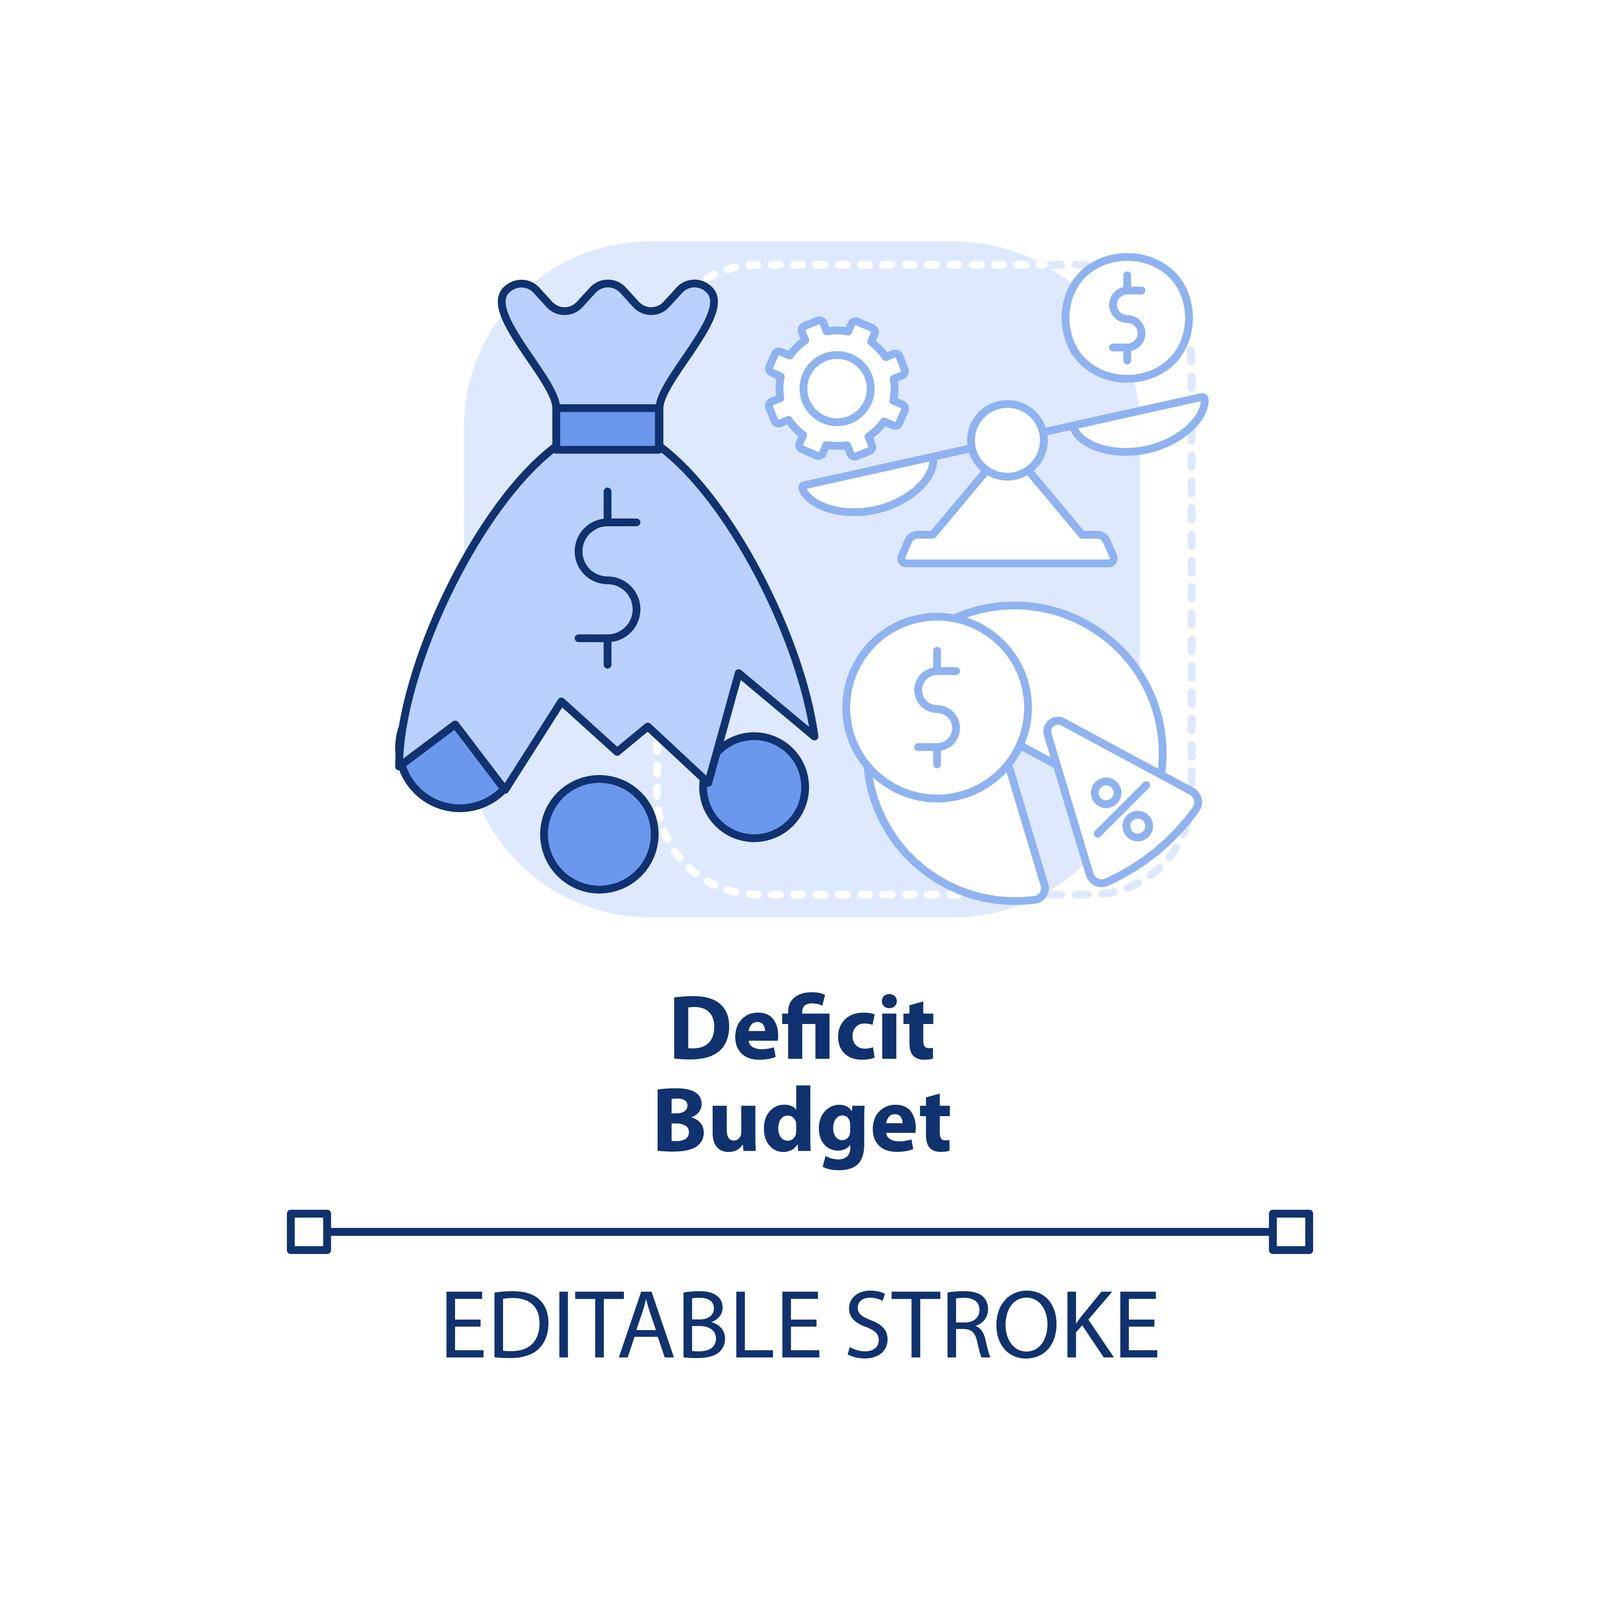 Deficit budget light blue concept icon by bsd